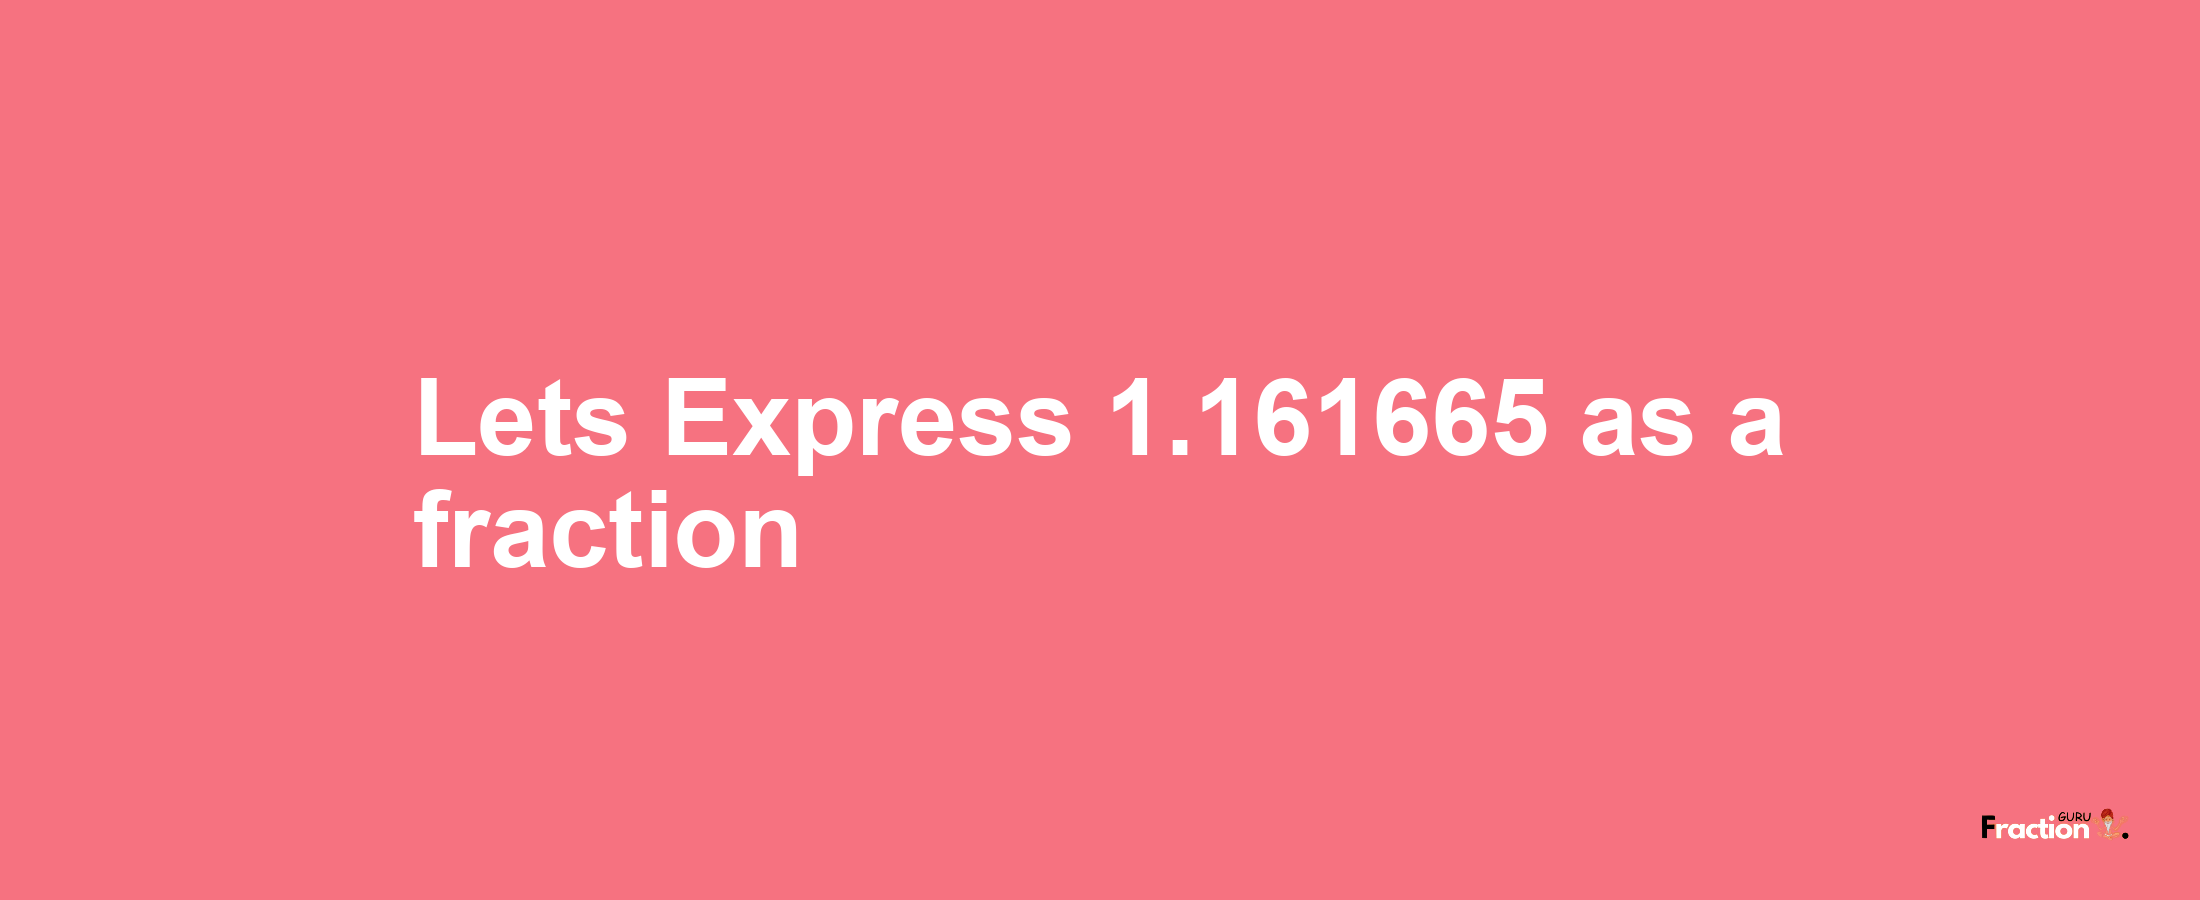 Lets Express 1.161665 as afraction